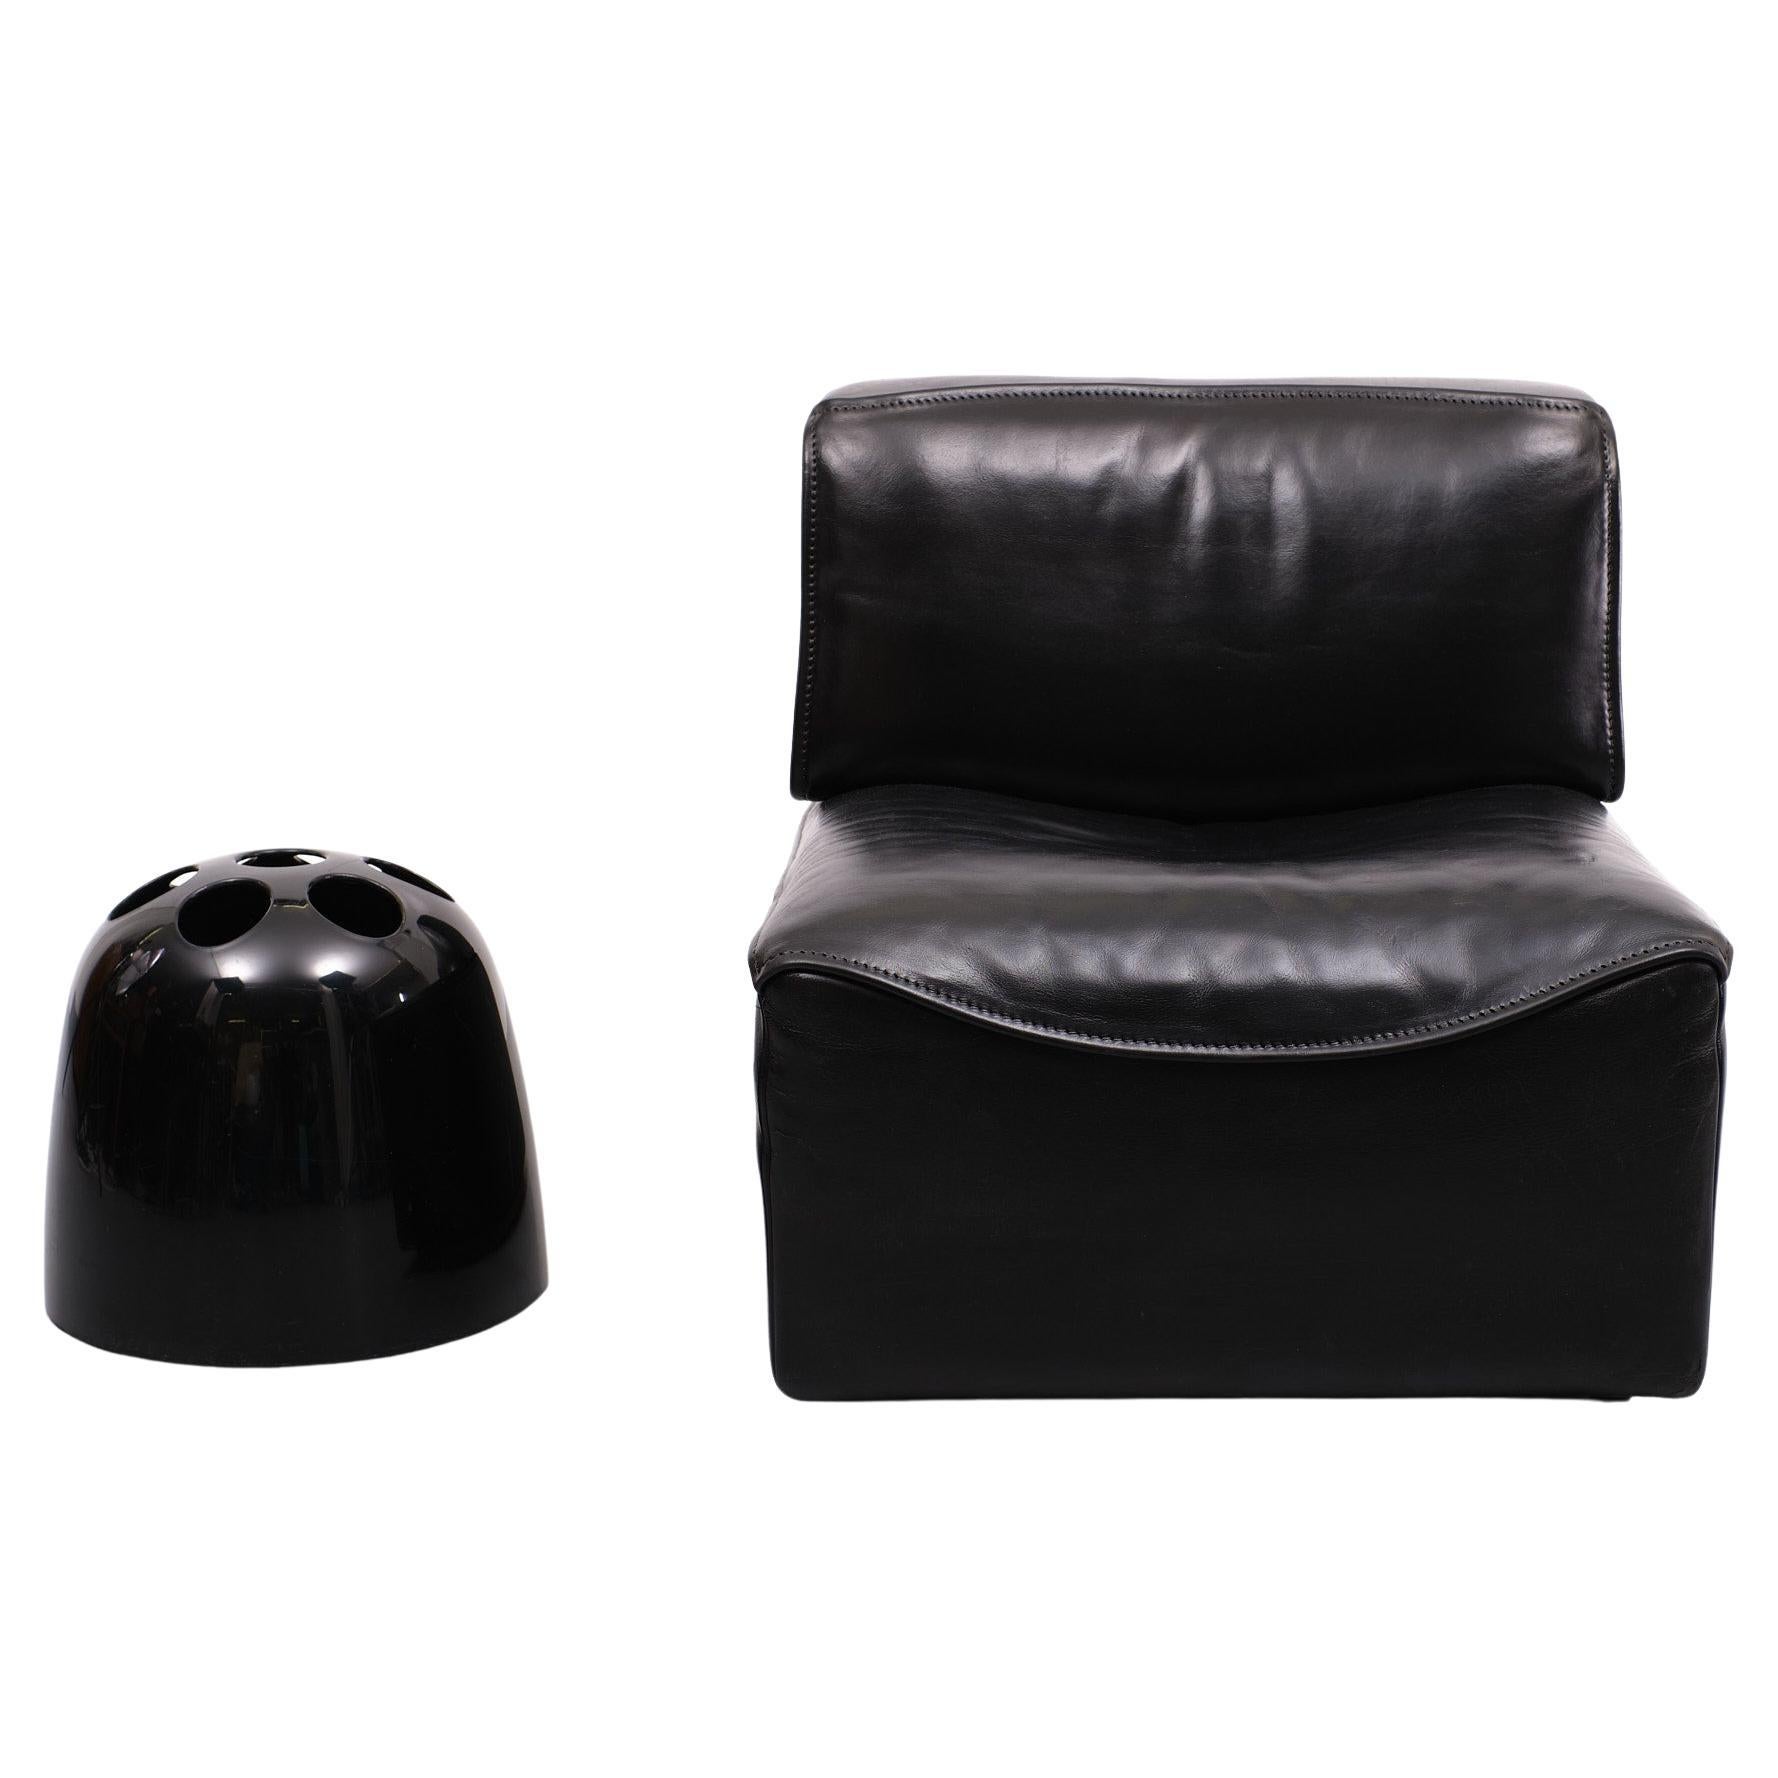 High quality black leather modular chair model DS15 designed and manufactured by De Sede, Switzerland 1970. This chair is one of the nicest quality sofa’s De Sede made in the 1970s. The chair is made from very thick Black color buffalo leather Very